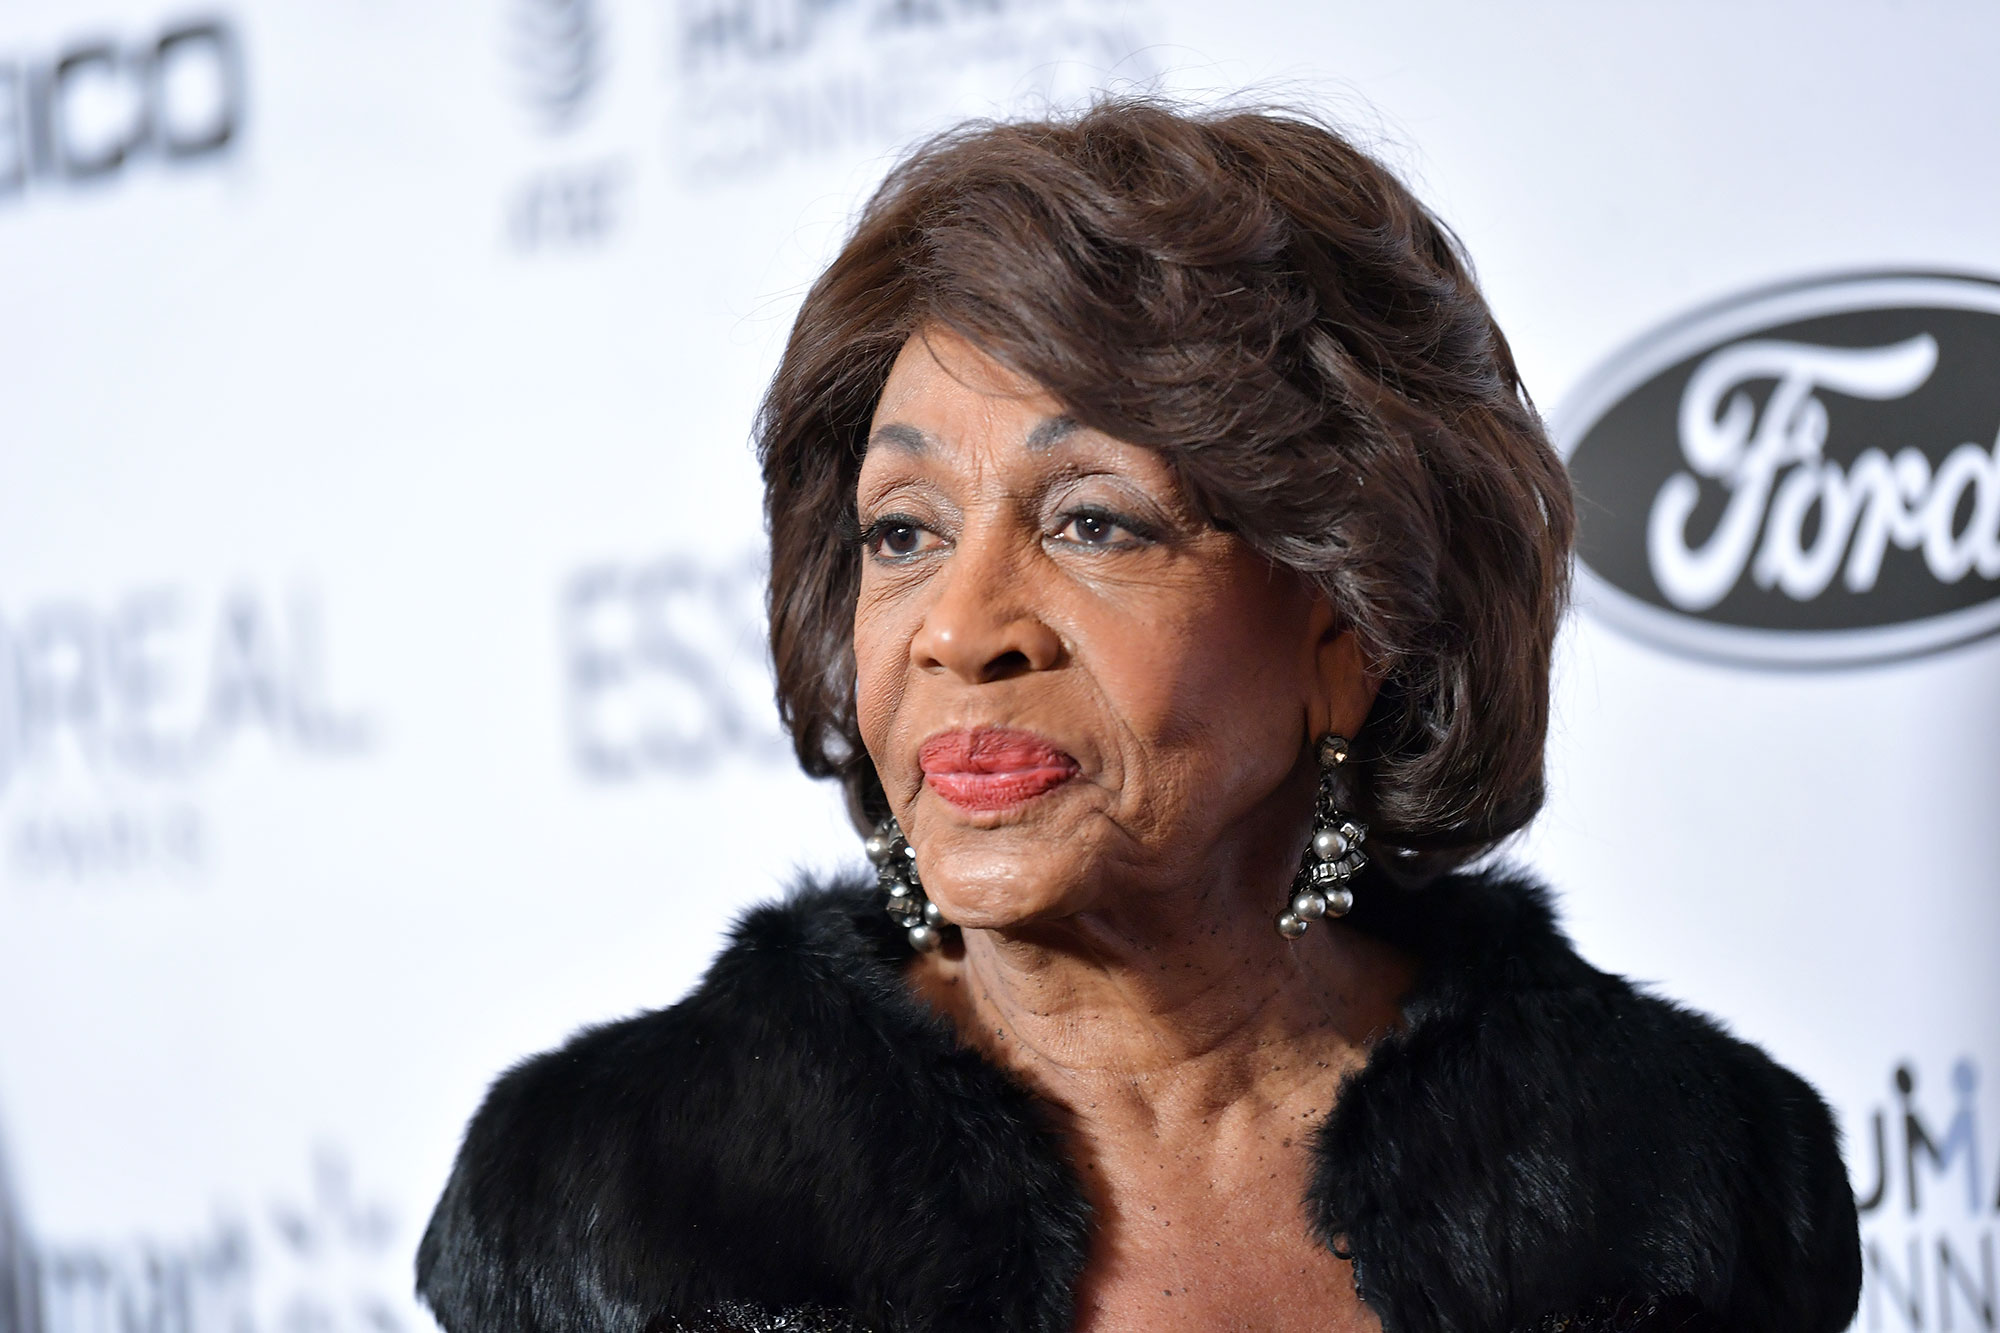 In this file photo, Congresswoman Maxine Waters attends 2019 Essence Black Women In Hollywood Awards in Beverly Hills, California.